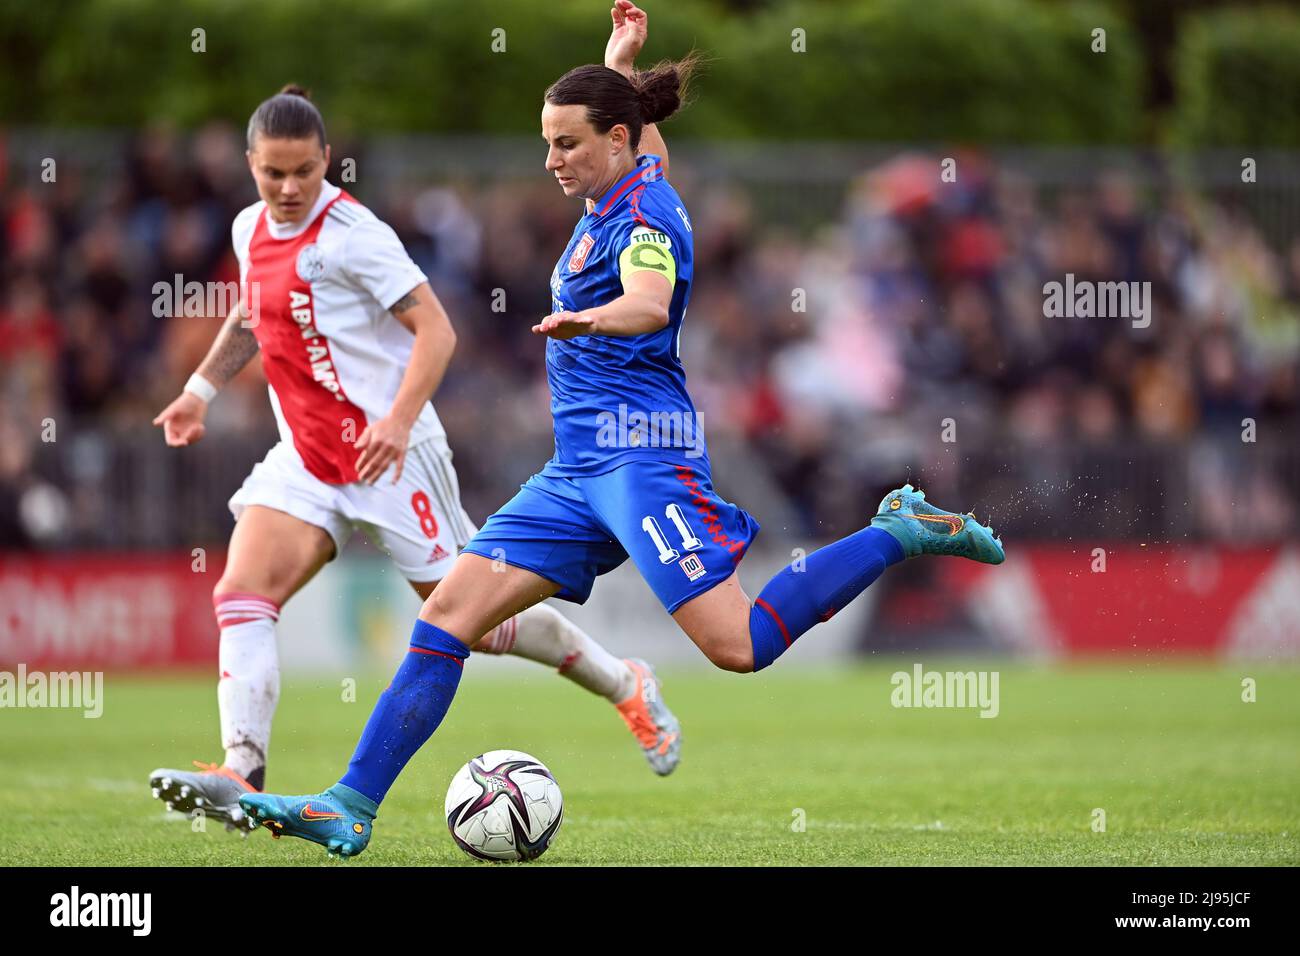 Amsterdam, Netherlands. 20th May, 2022. Amsterdam - (lr) Sherida Spitse of Ajax, Renate Jansen of FC Twente during the Dutch Eredivisie women's match between Ajax and FC Twente at De Toekomst sports complex on May 20, 2022 in Amsterdam, Netherlands. ANP OLAF KRAAK Credit: ANP/Alamy Live News Stock Photo